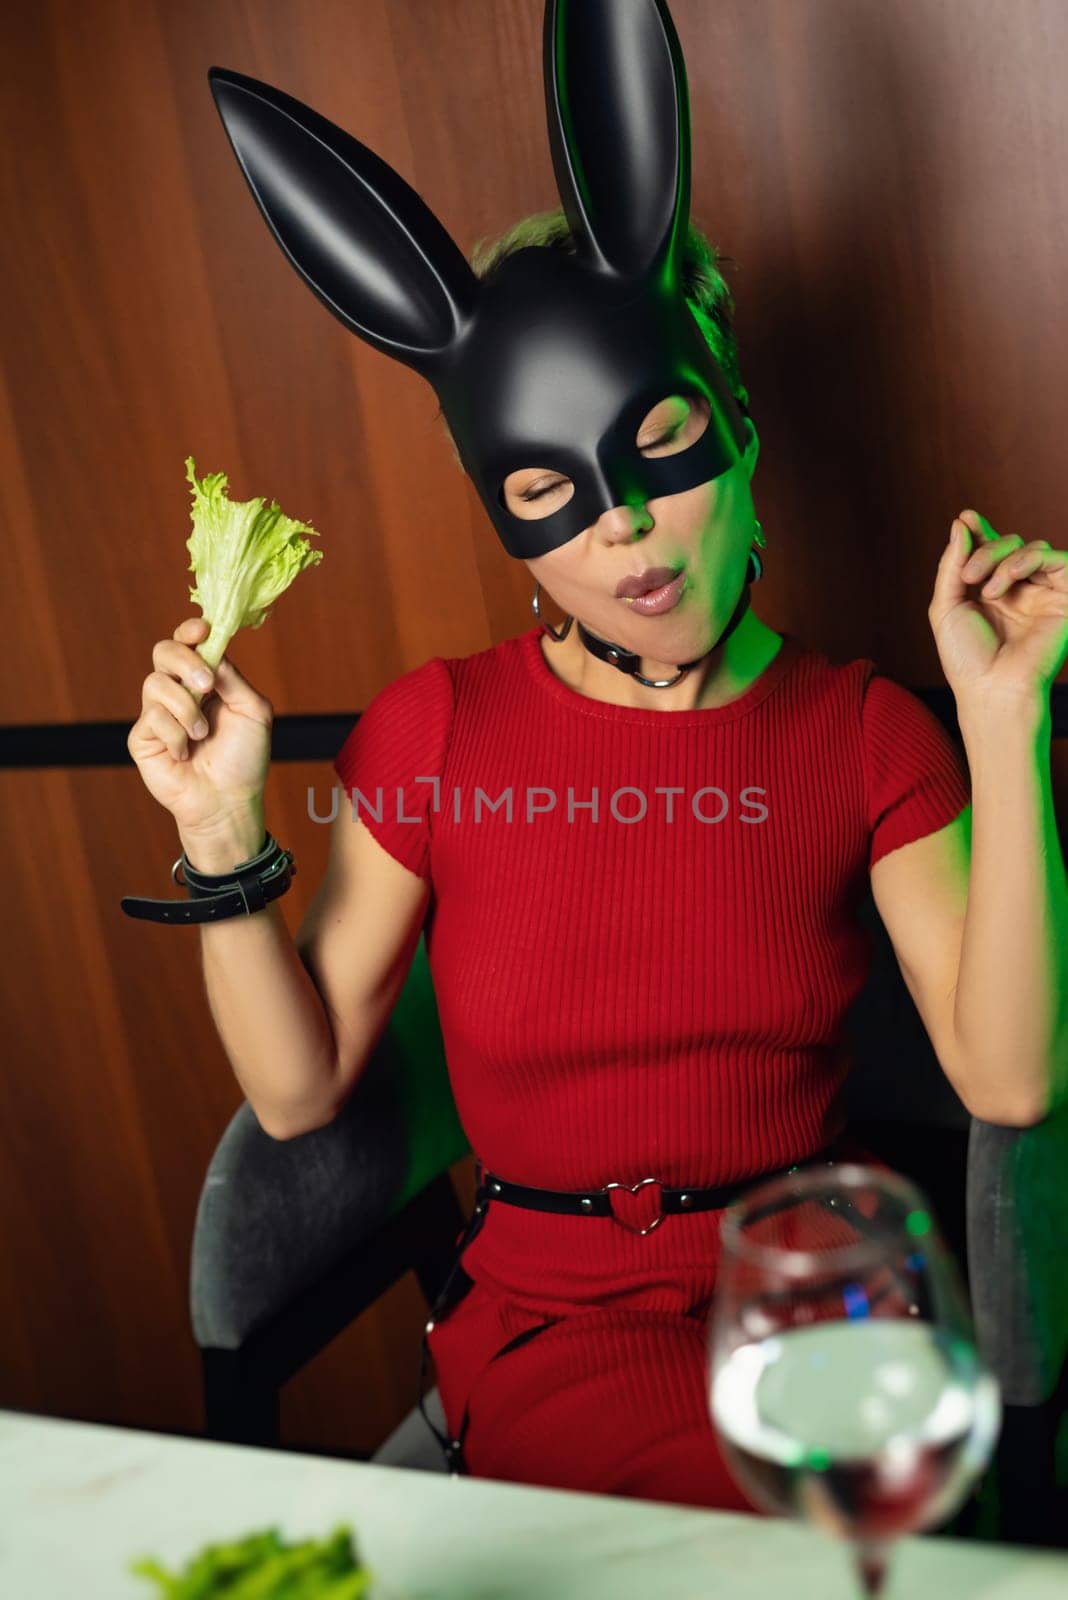 A beautiful girl in a bdsm rabbit mask and a bright red dress eats lettuce leaves promoting a healthy lifestyle and vegetarianism